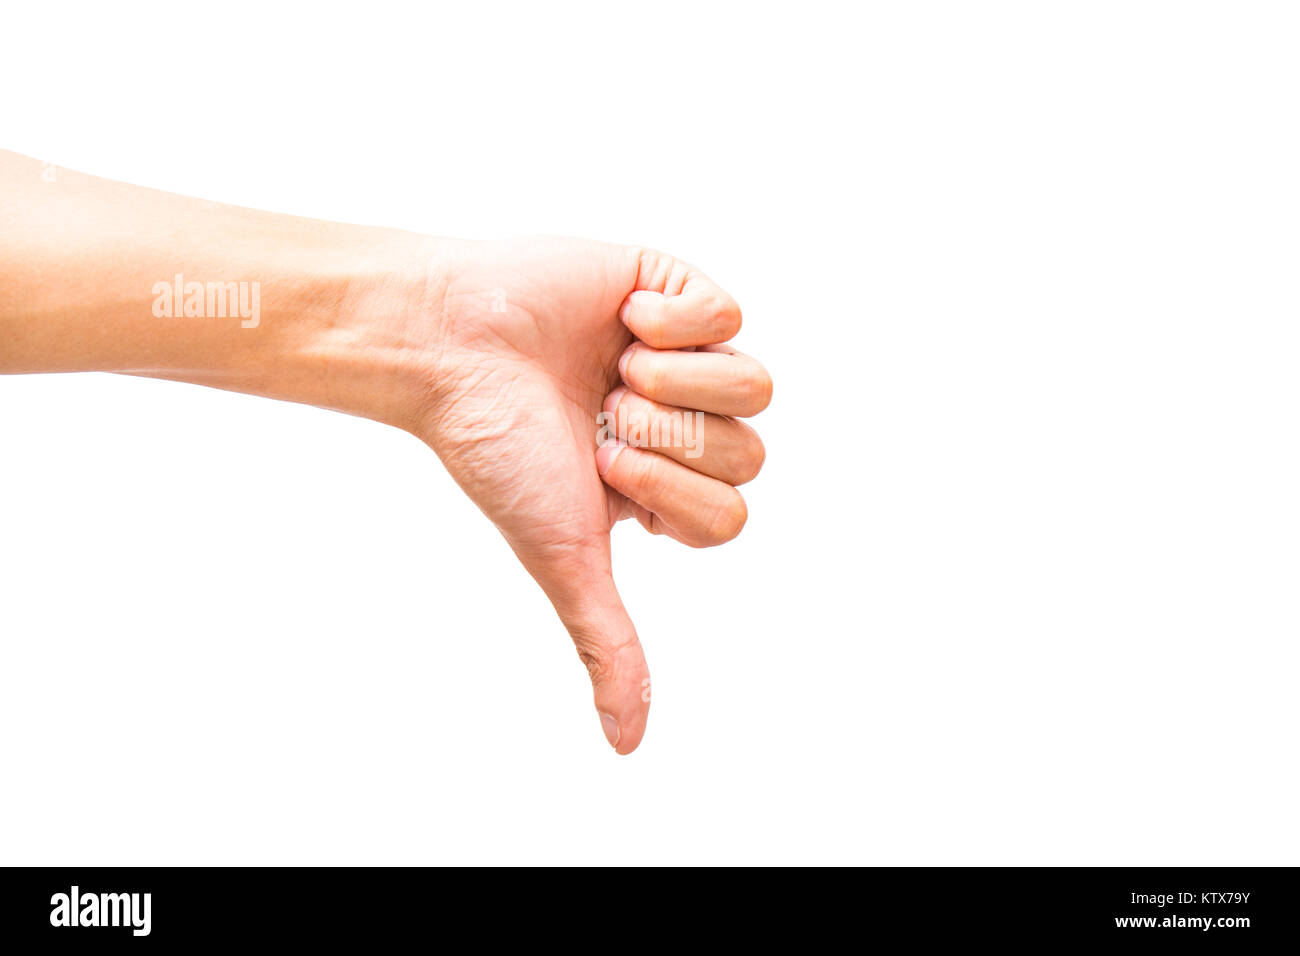 dislike or thumb down hand sign on isolate or white background Stock Photo